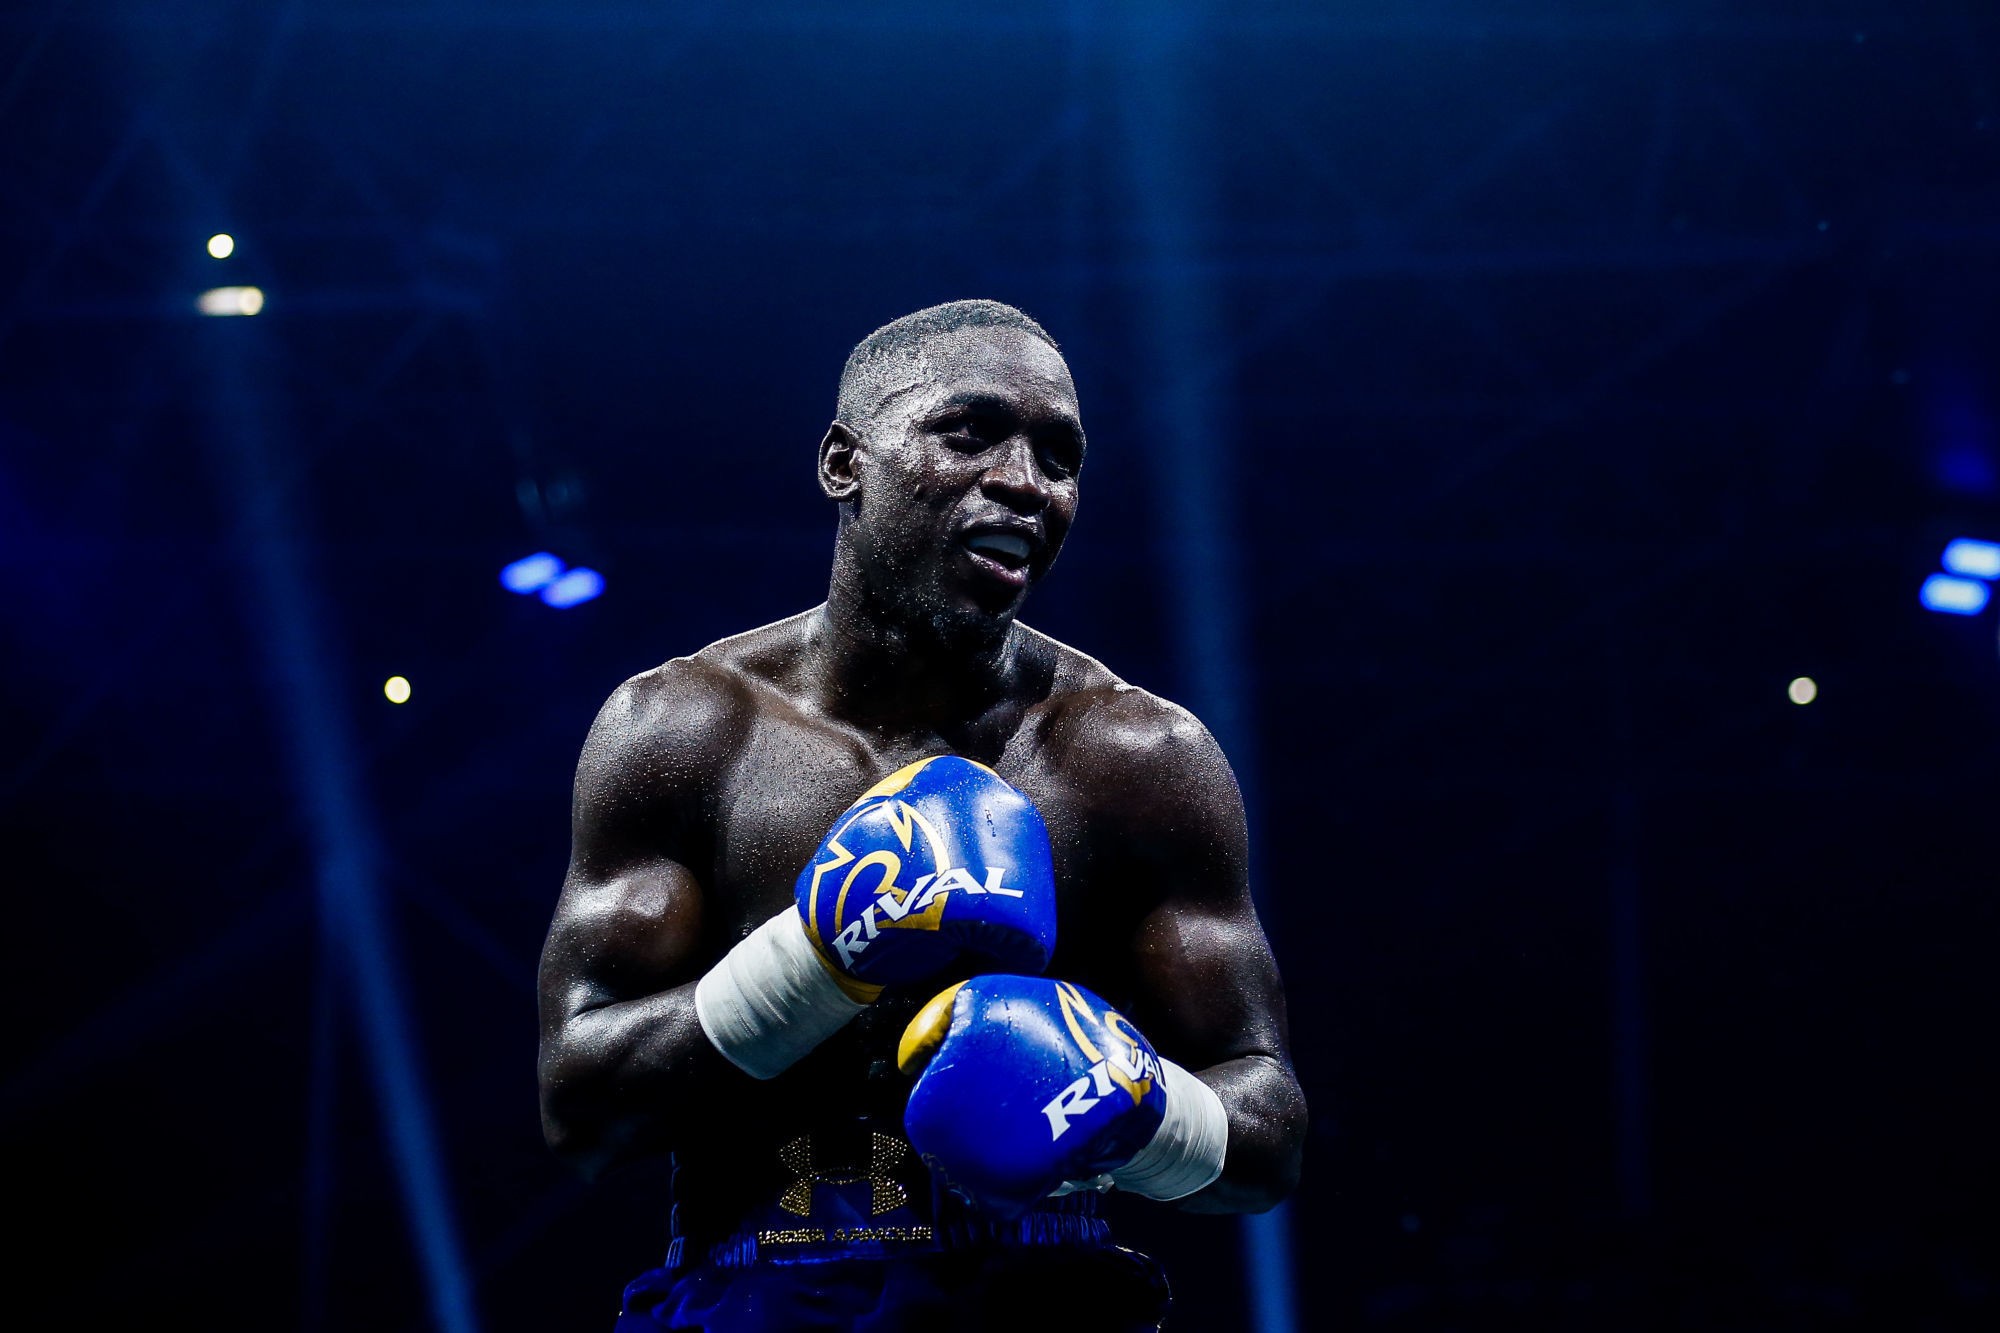 Souleymane CISSOKHO of France ( Gloves Blue ) during the La Conquete - Tony Yoka on September 28, 2019 in Nantes, France. (Photo by Johnny Fidelin/Icon Sport) - Souleymane CISSOKHO - Palais Des Sports De Beaulieu - Nantes (France)